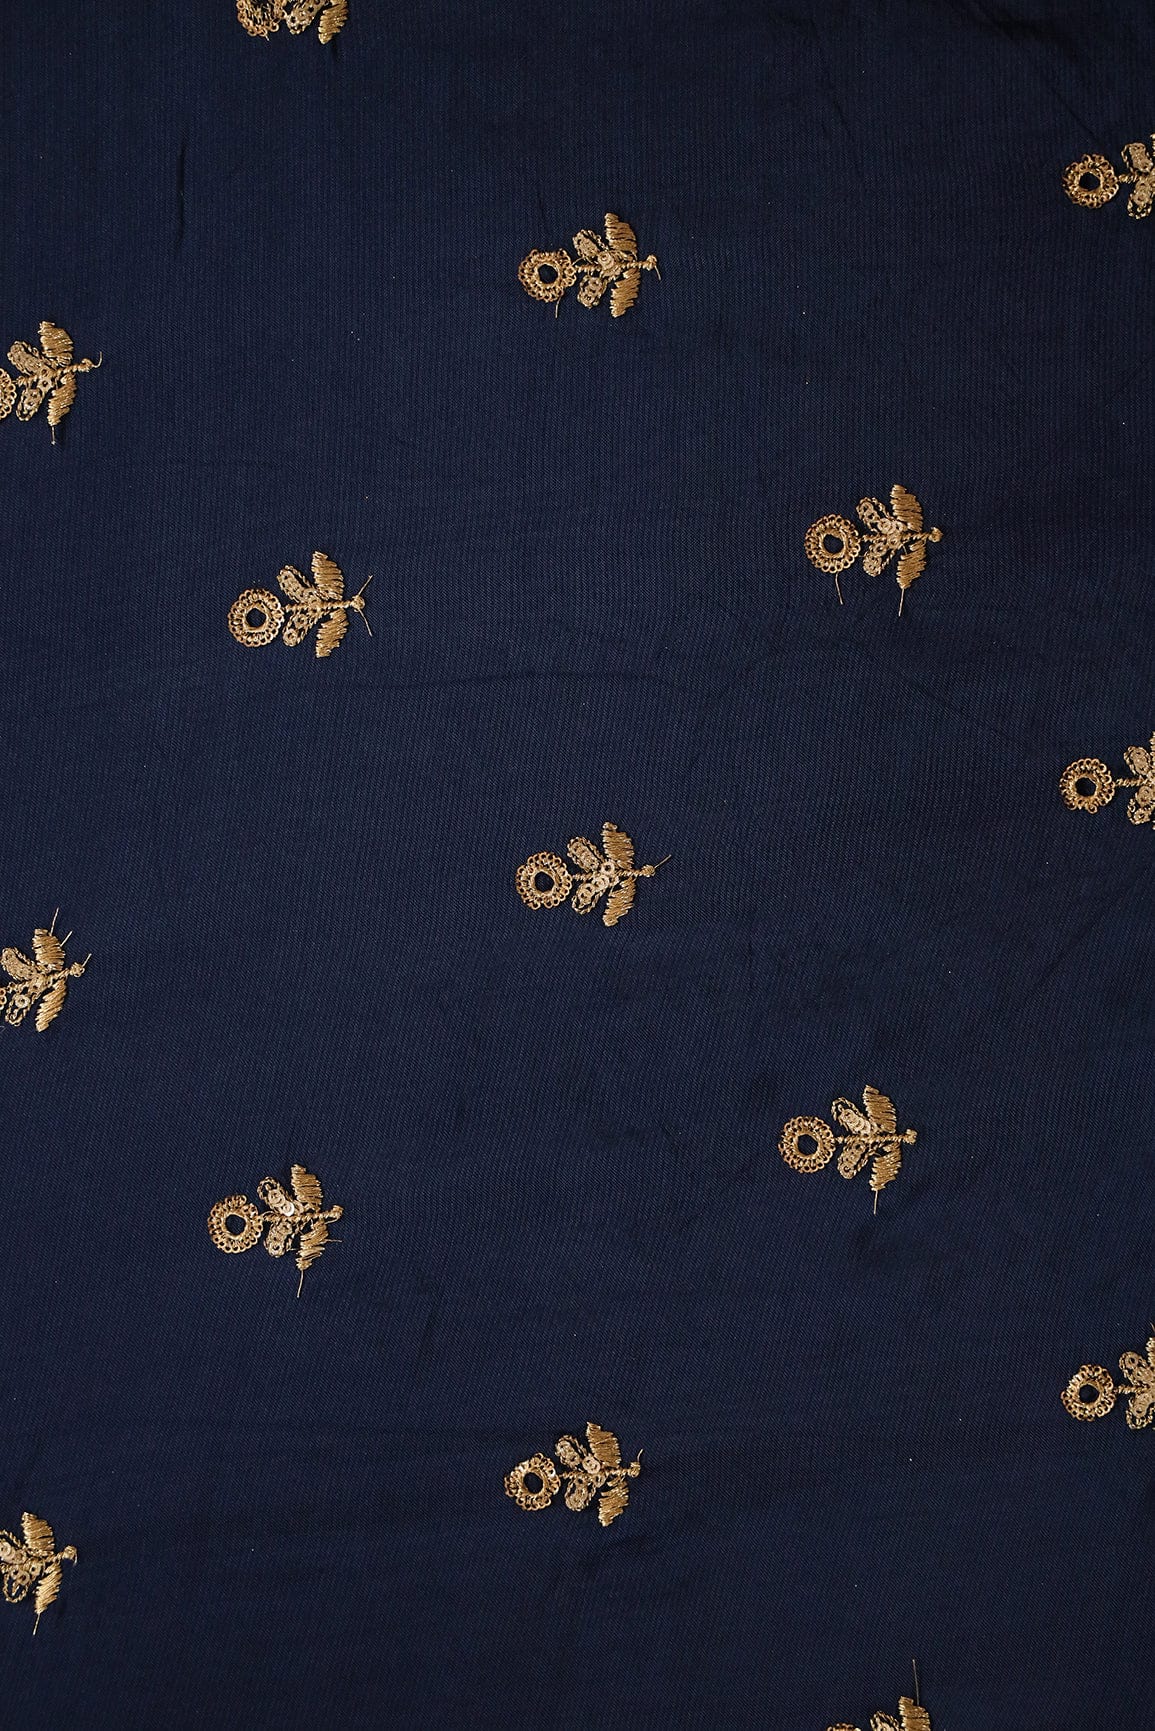 doeraa Embroidery Fabrics Gold Sequins and Zari Floral Embroidery On Navy Blue Uppada Silk Fabric